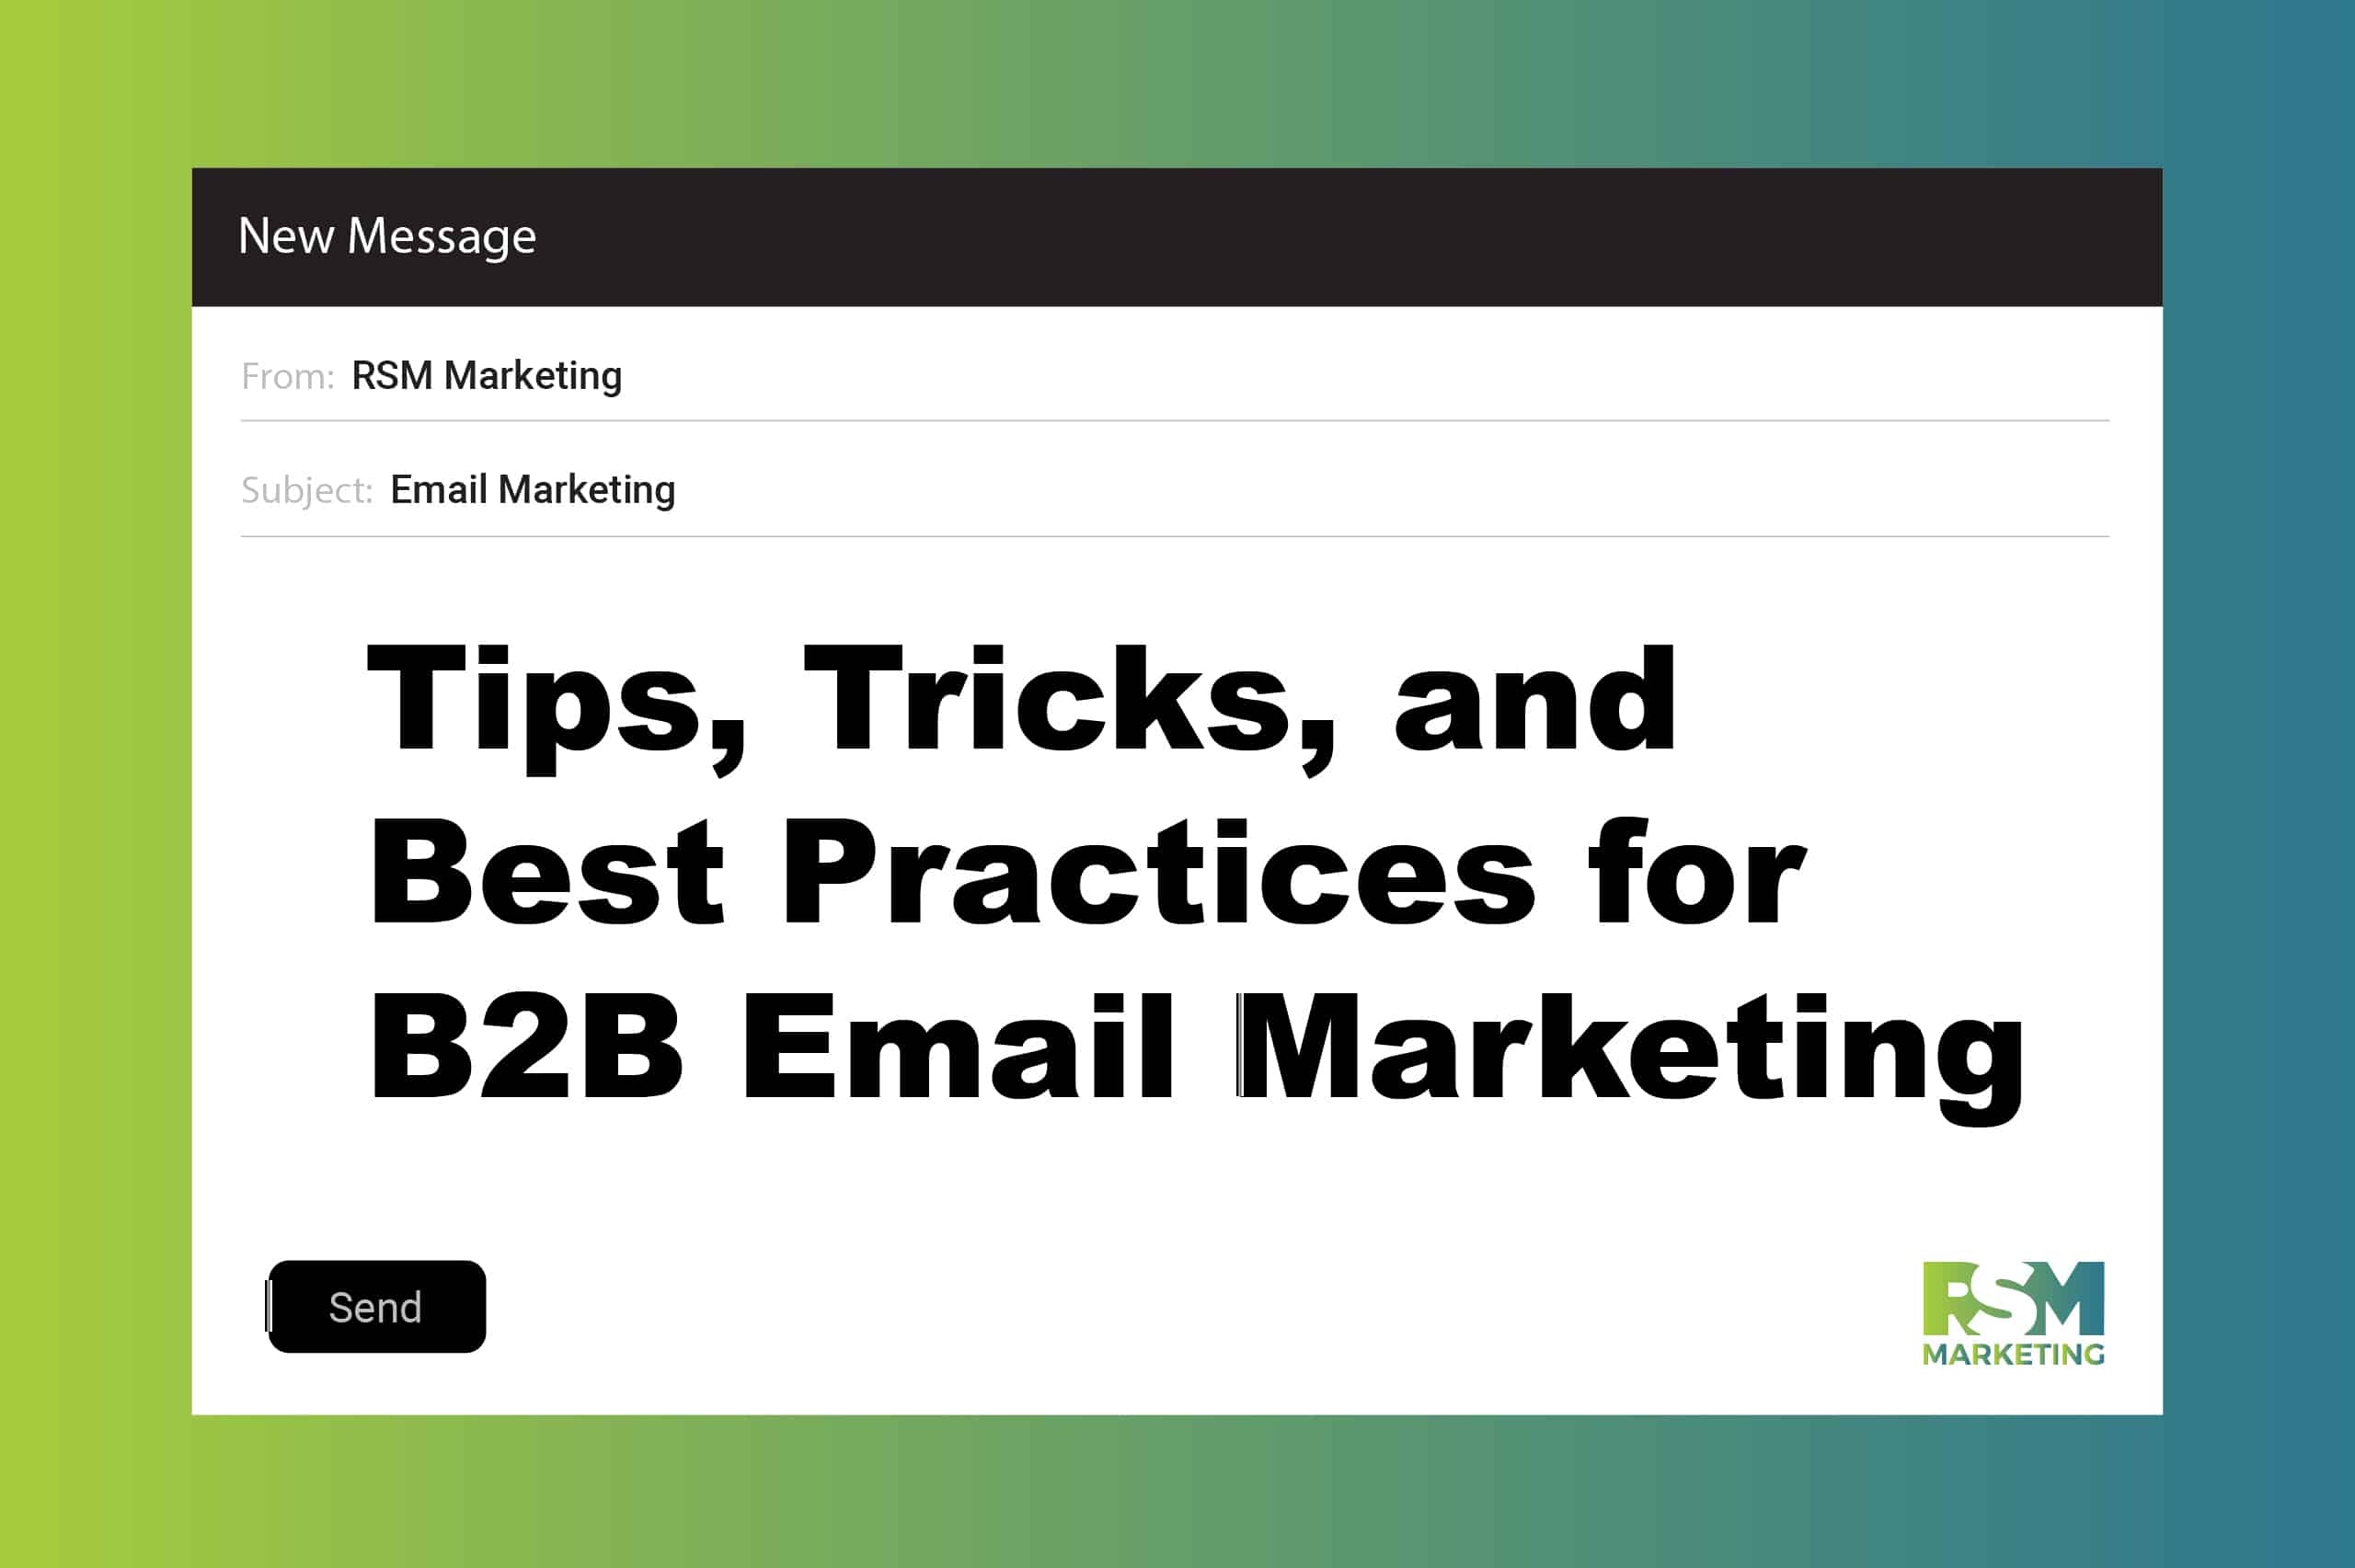 Tips-tricks-and-best-practices-for-b2b-email-marketing